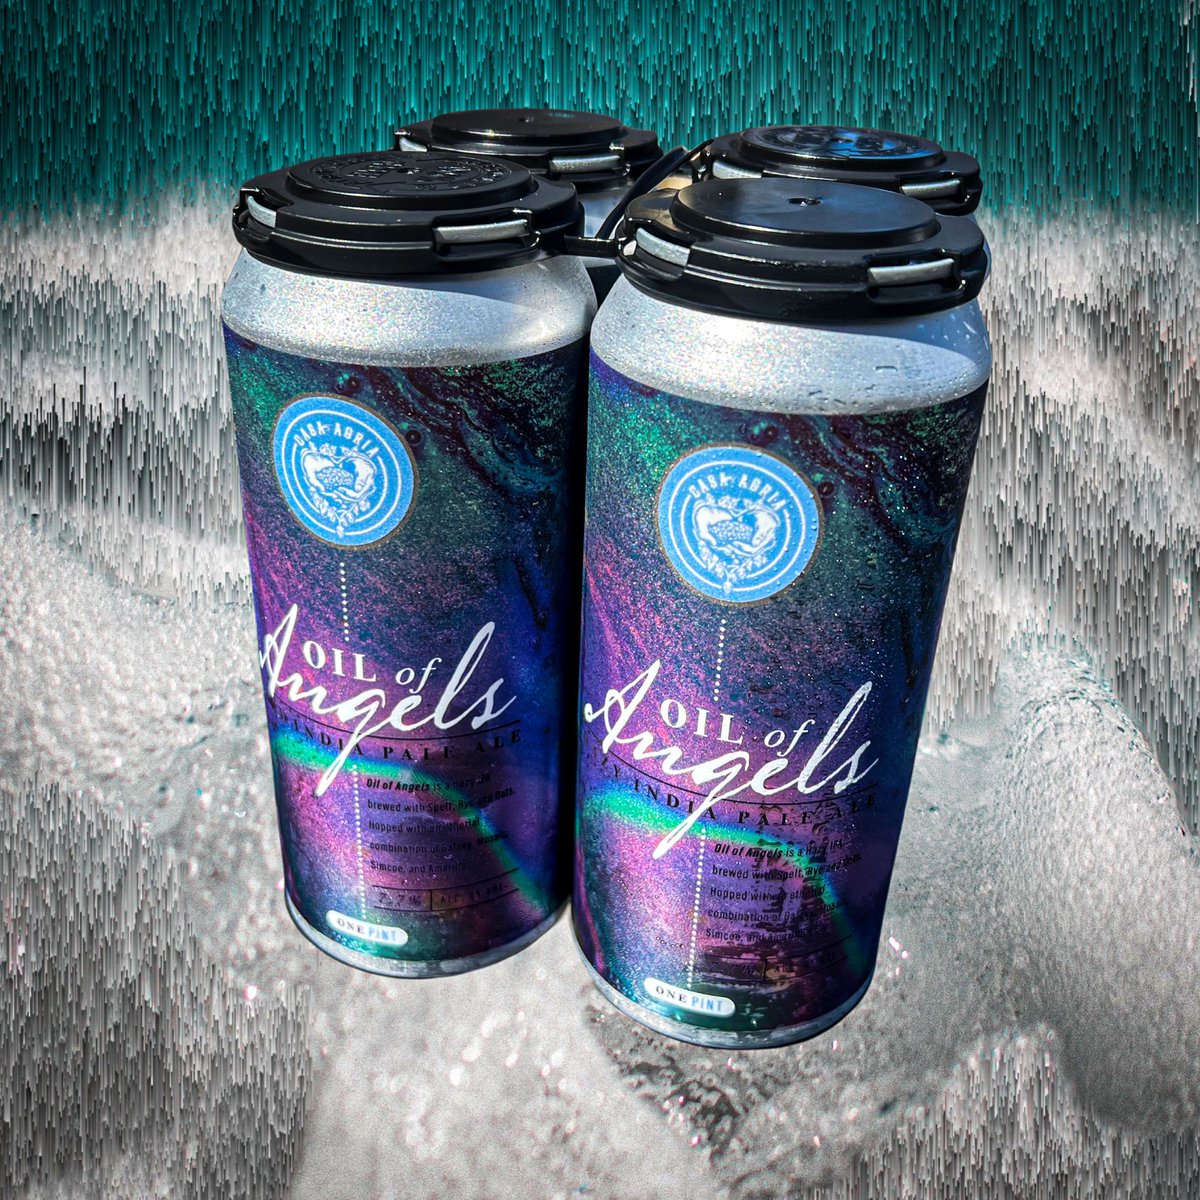 ///FRIDAY•SEPTEMBER 30TH/// FRIDAY RELEASE! ➊ We are bringing back the delicious Oil of Angels Hazy IPA- hopped with an ethereal combination of Galaxy, Mosaic, Simcoe, and Amarillo, all bringing big flavors of tropical fruit, peaches, and melon!